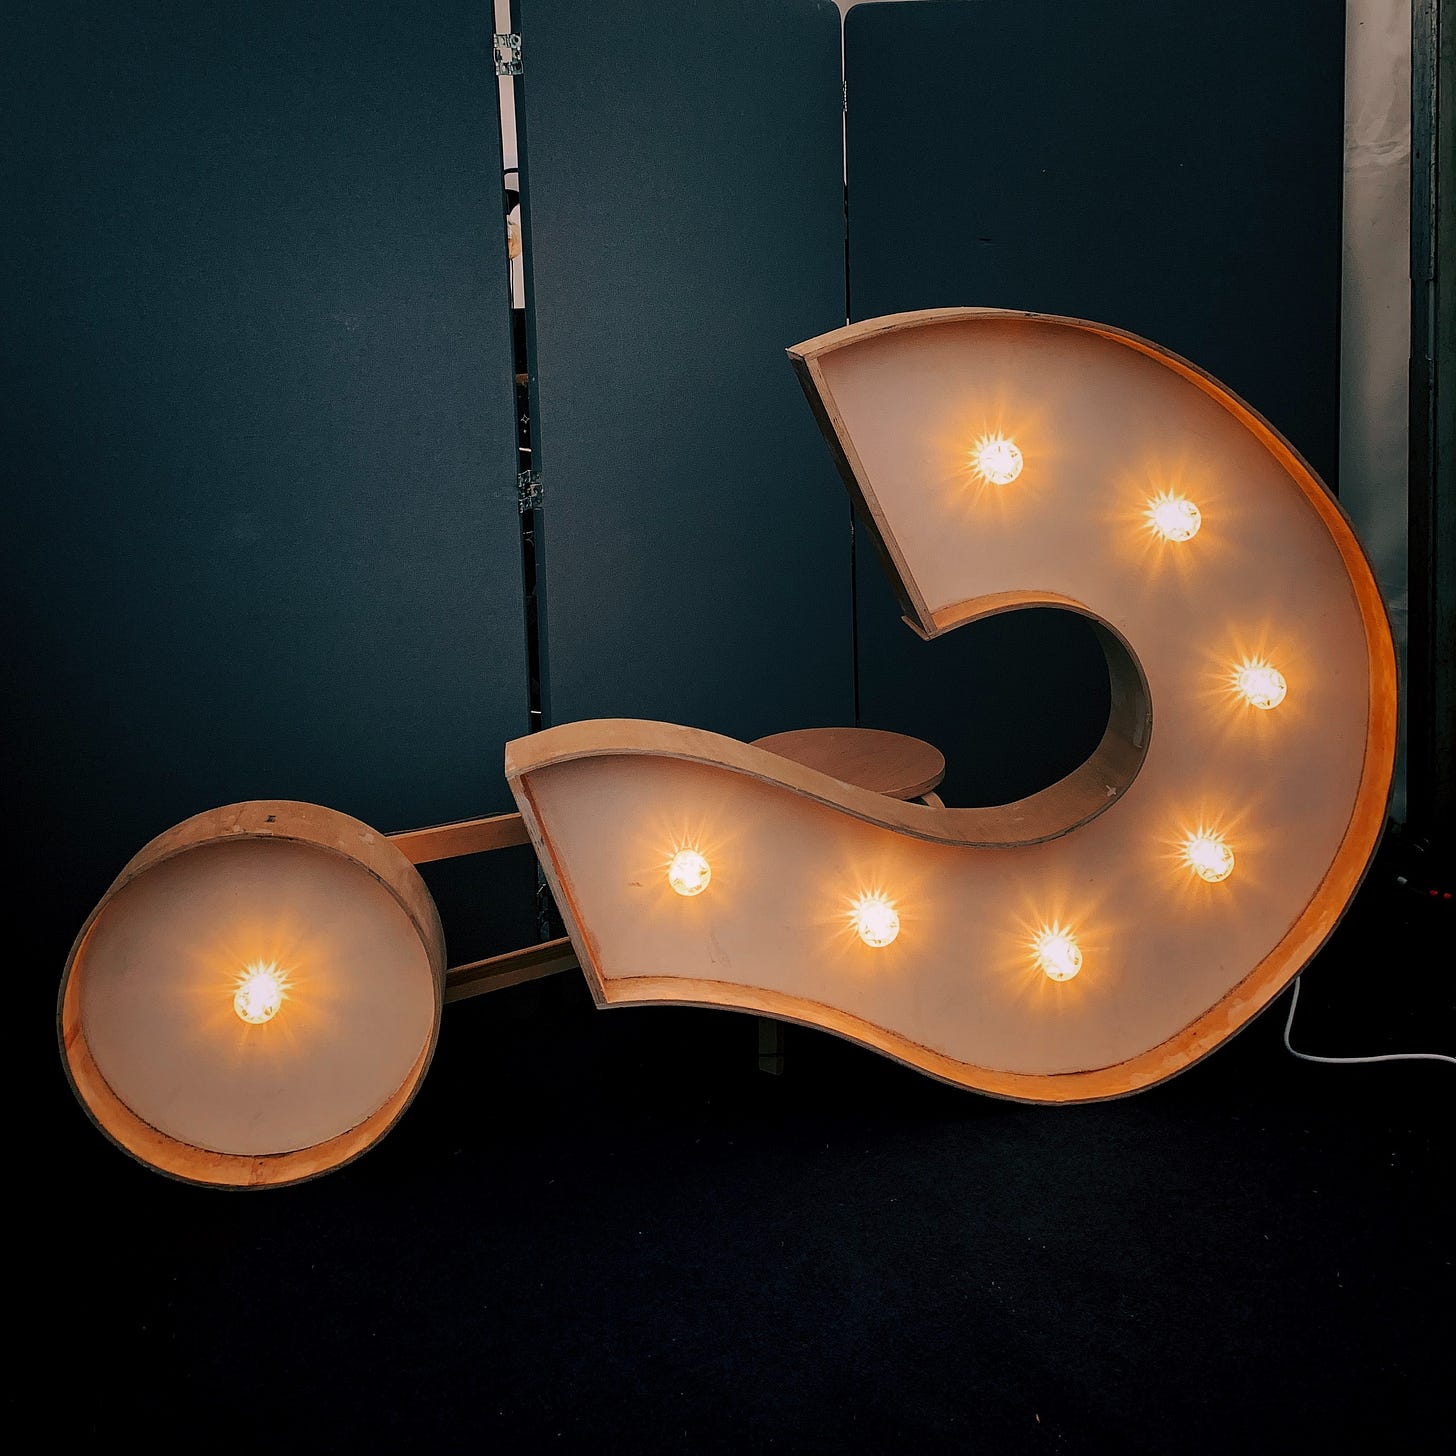 Image of a questionmark-shaped ceiling lamp.